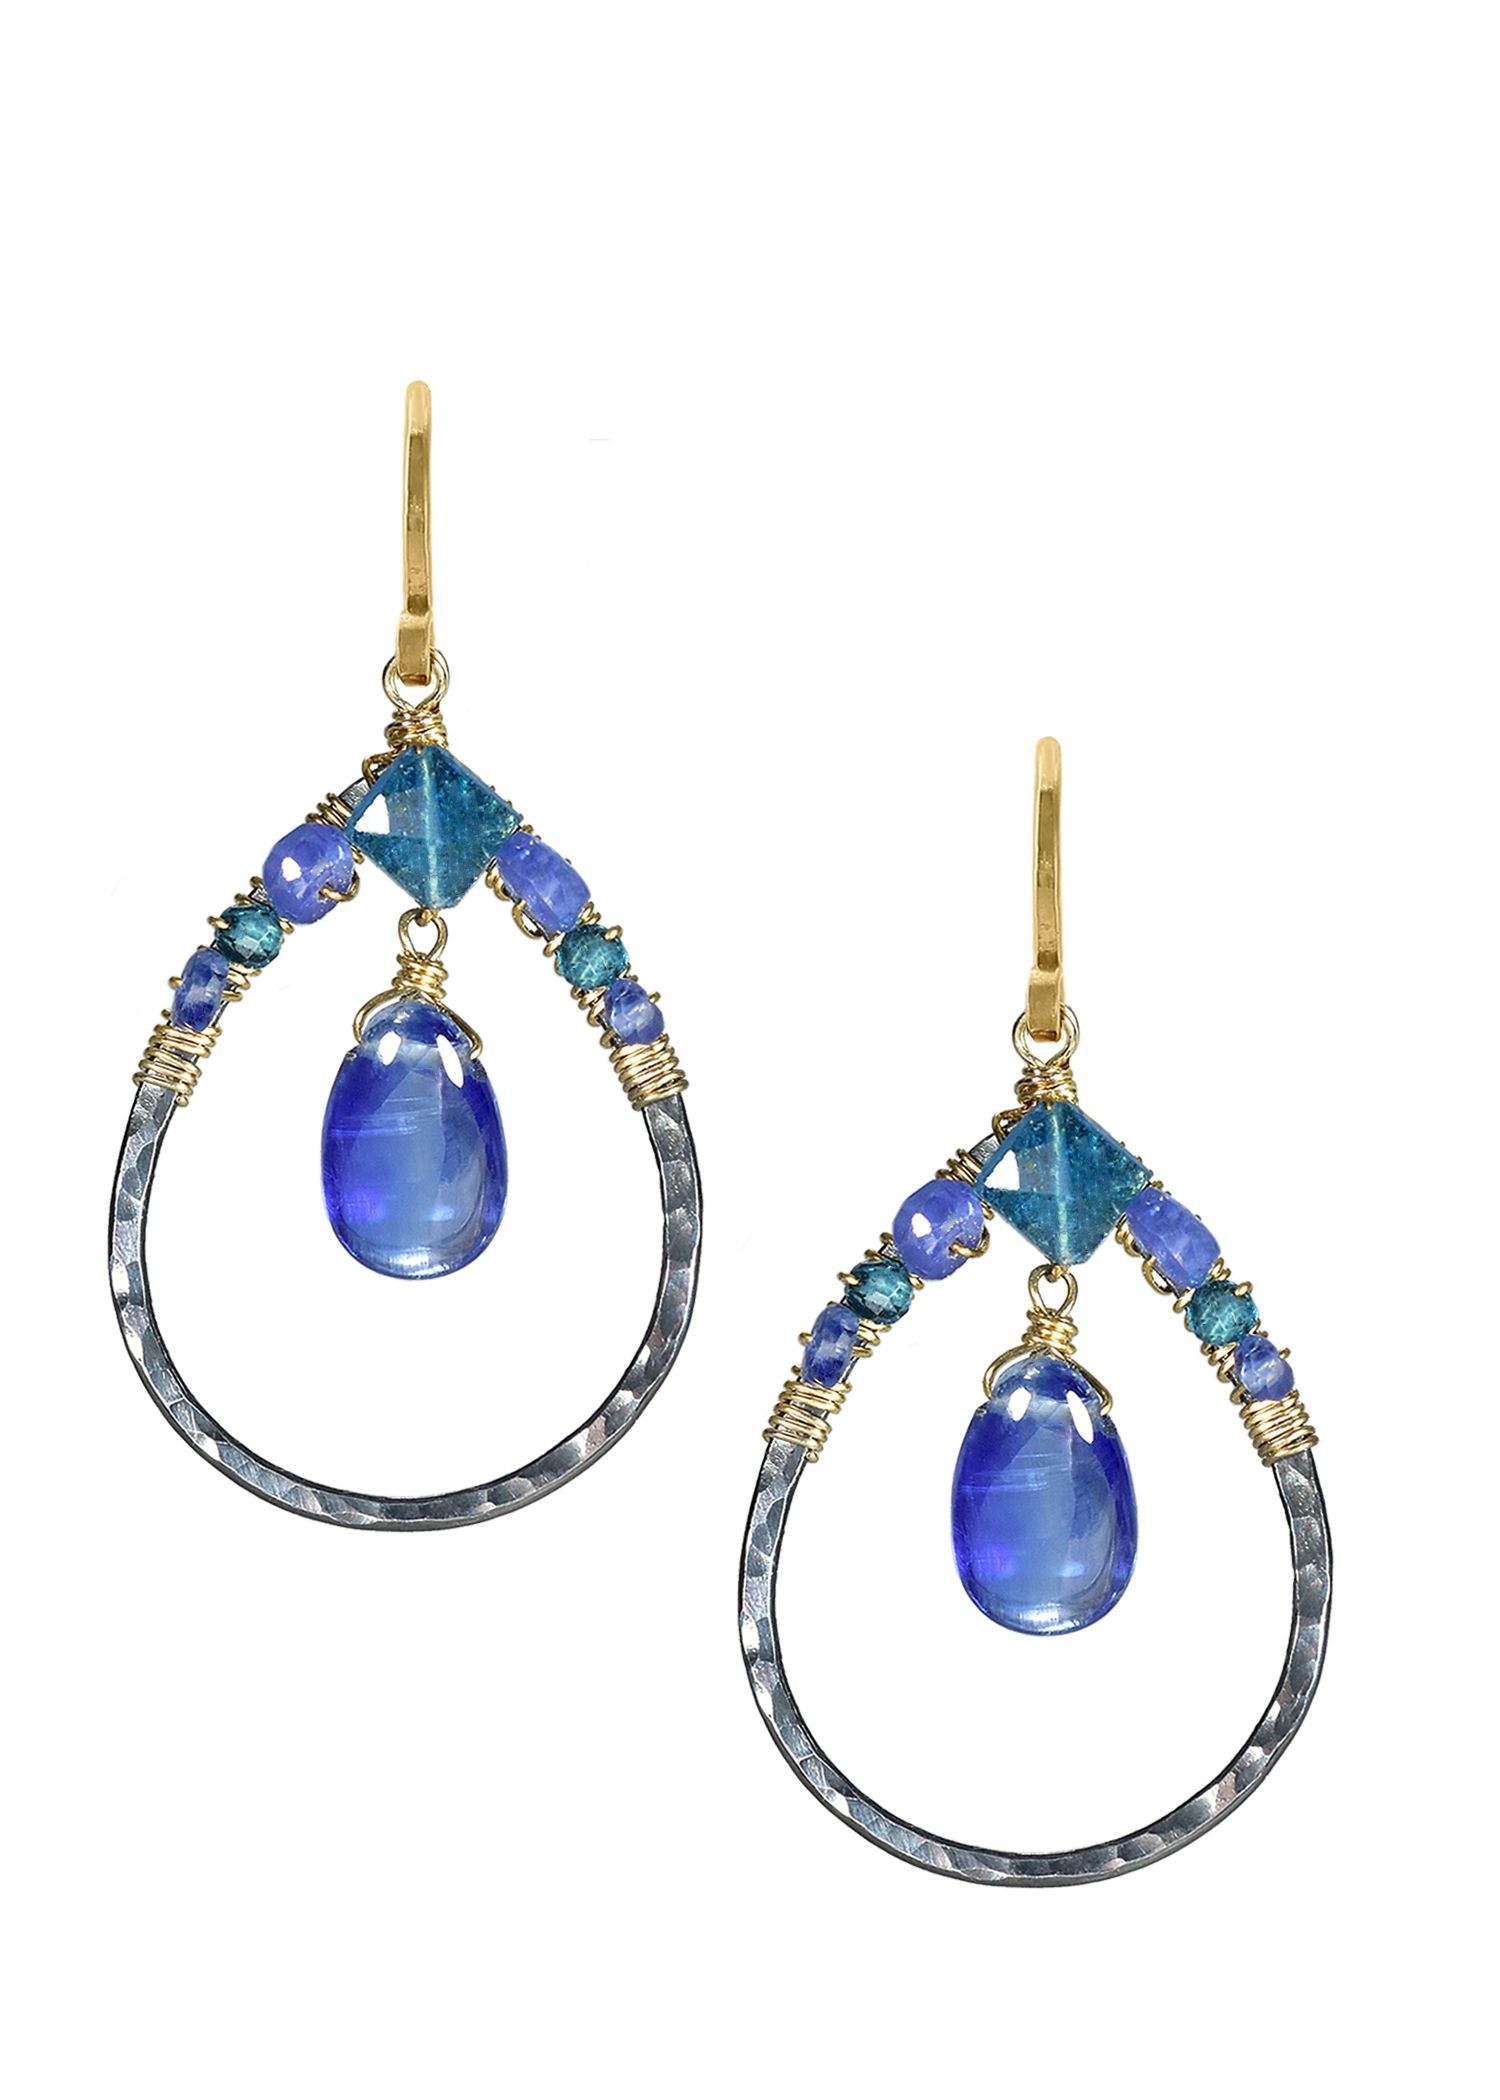 London blue topaz Kyanite Blue quartz 14k gold fill Blackened sterling silver Mixed metal Earrings measure 1-3/8" in length (including the ear wires) and 11/16" in width Handmade in our Los Angeles studio